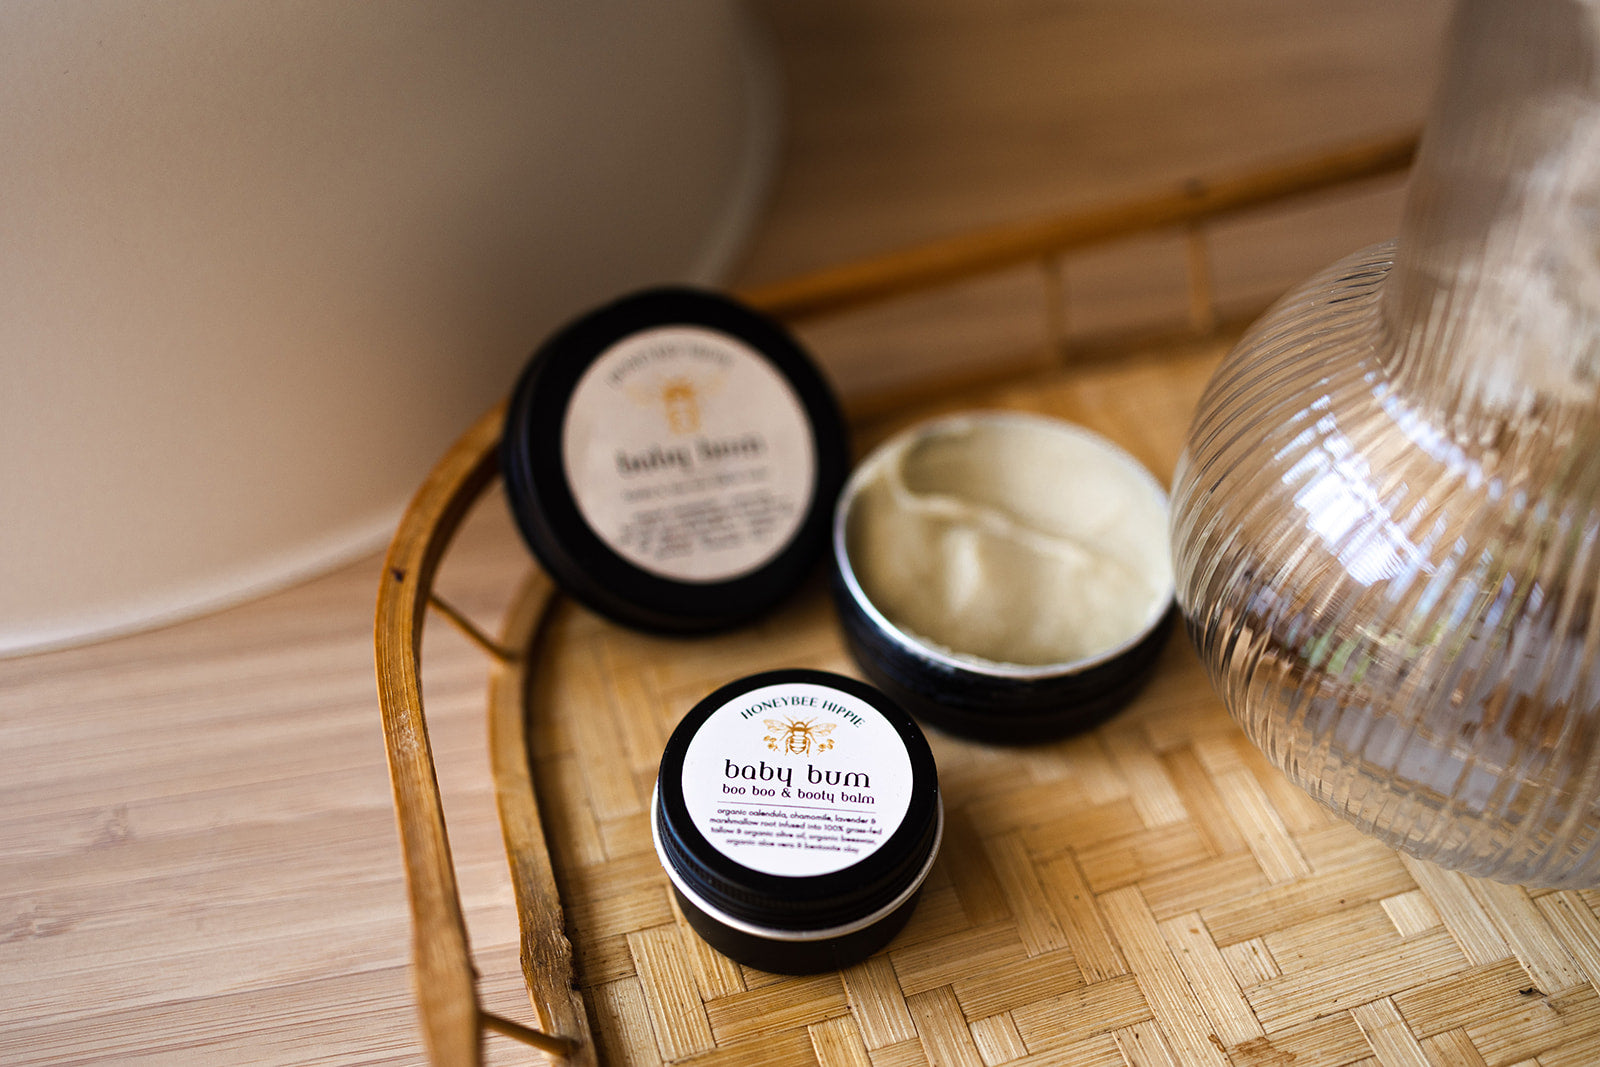 open and sealed tins of safe moisturizer for babies made with organic tallow and oils by honeybee hippie